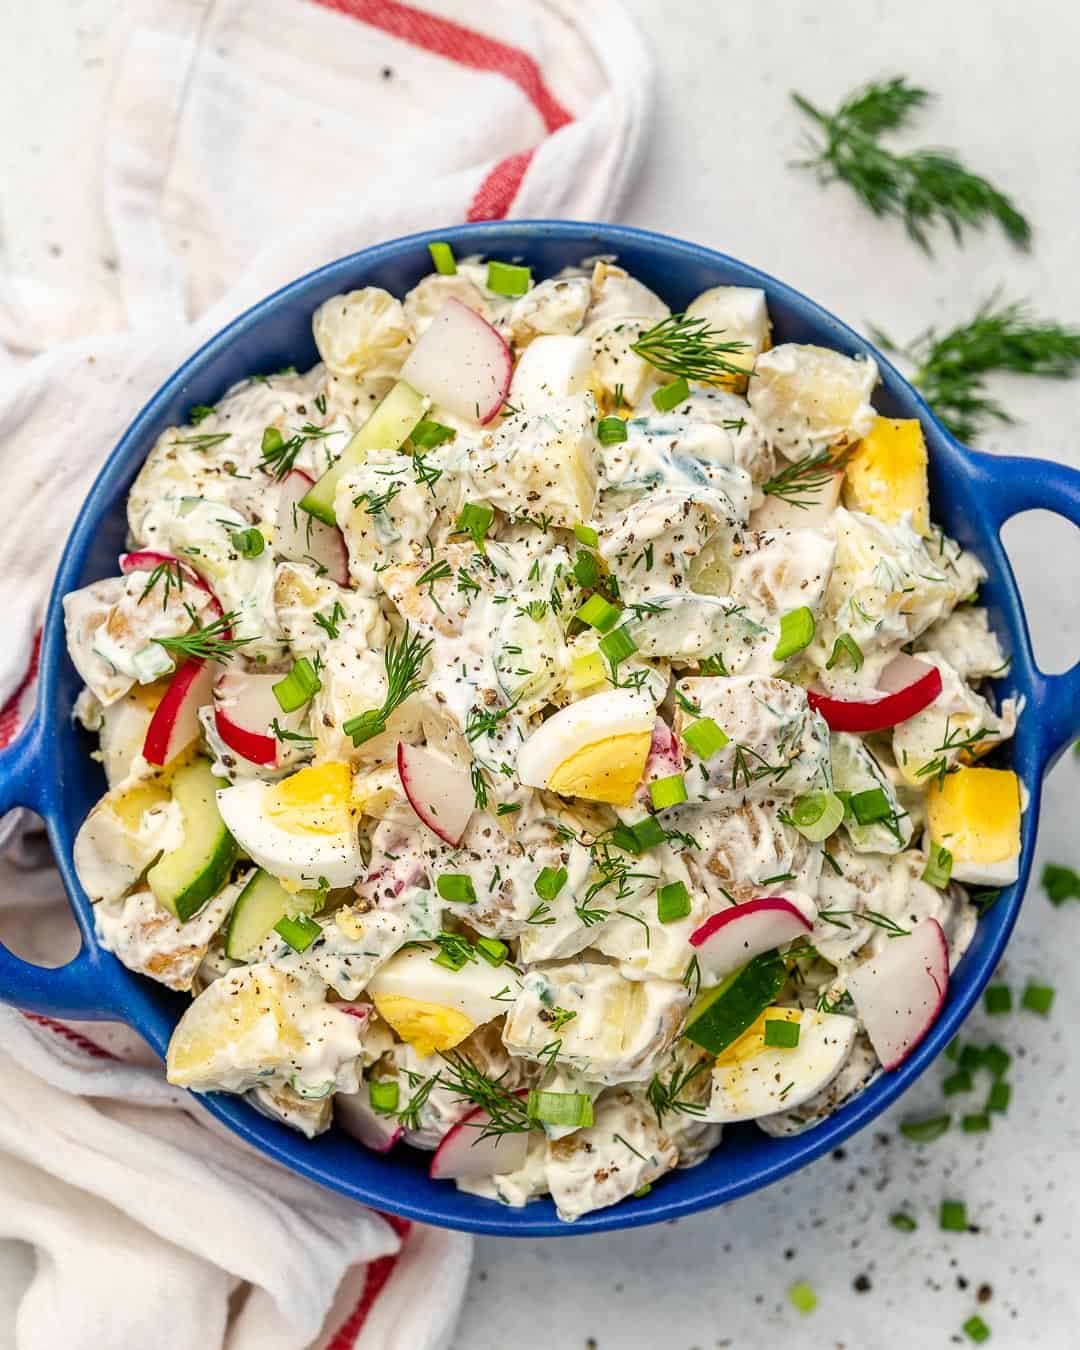 simple and healthy potato salad recipe with eggs, cucumber and radish